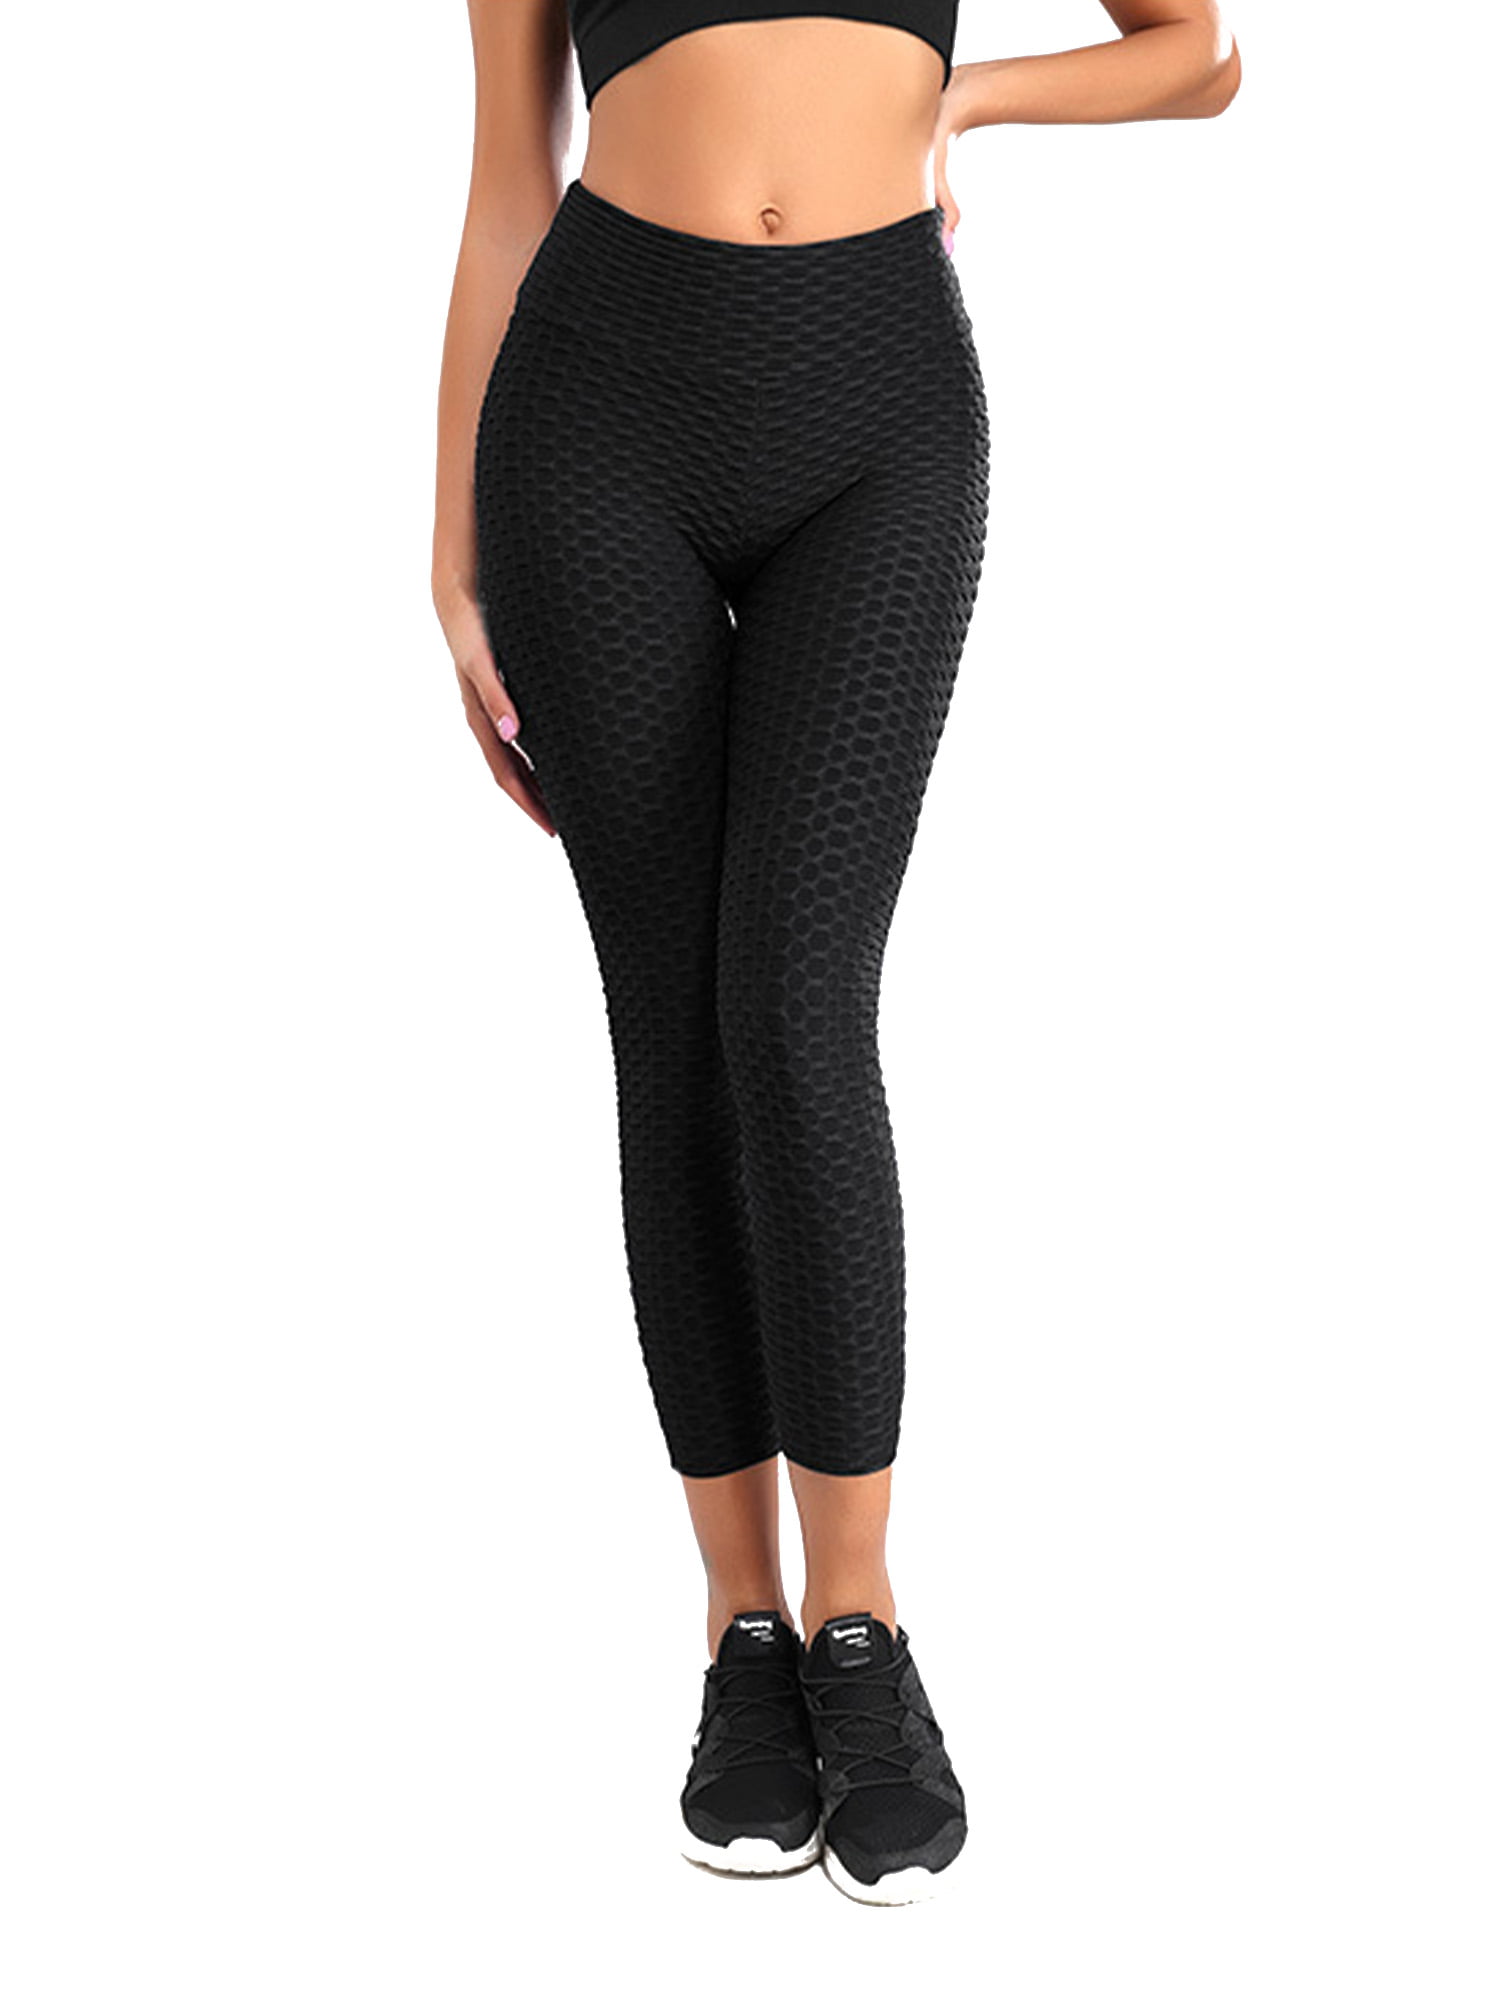 Women Anti-Cellulite Yoga Pants High Waist PUSH UP Leggings Ruched Trousers GYM 